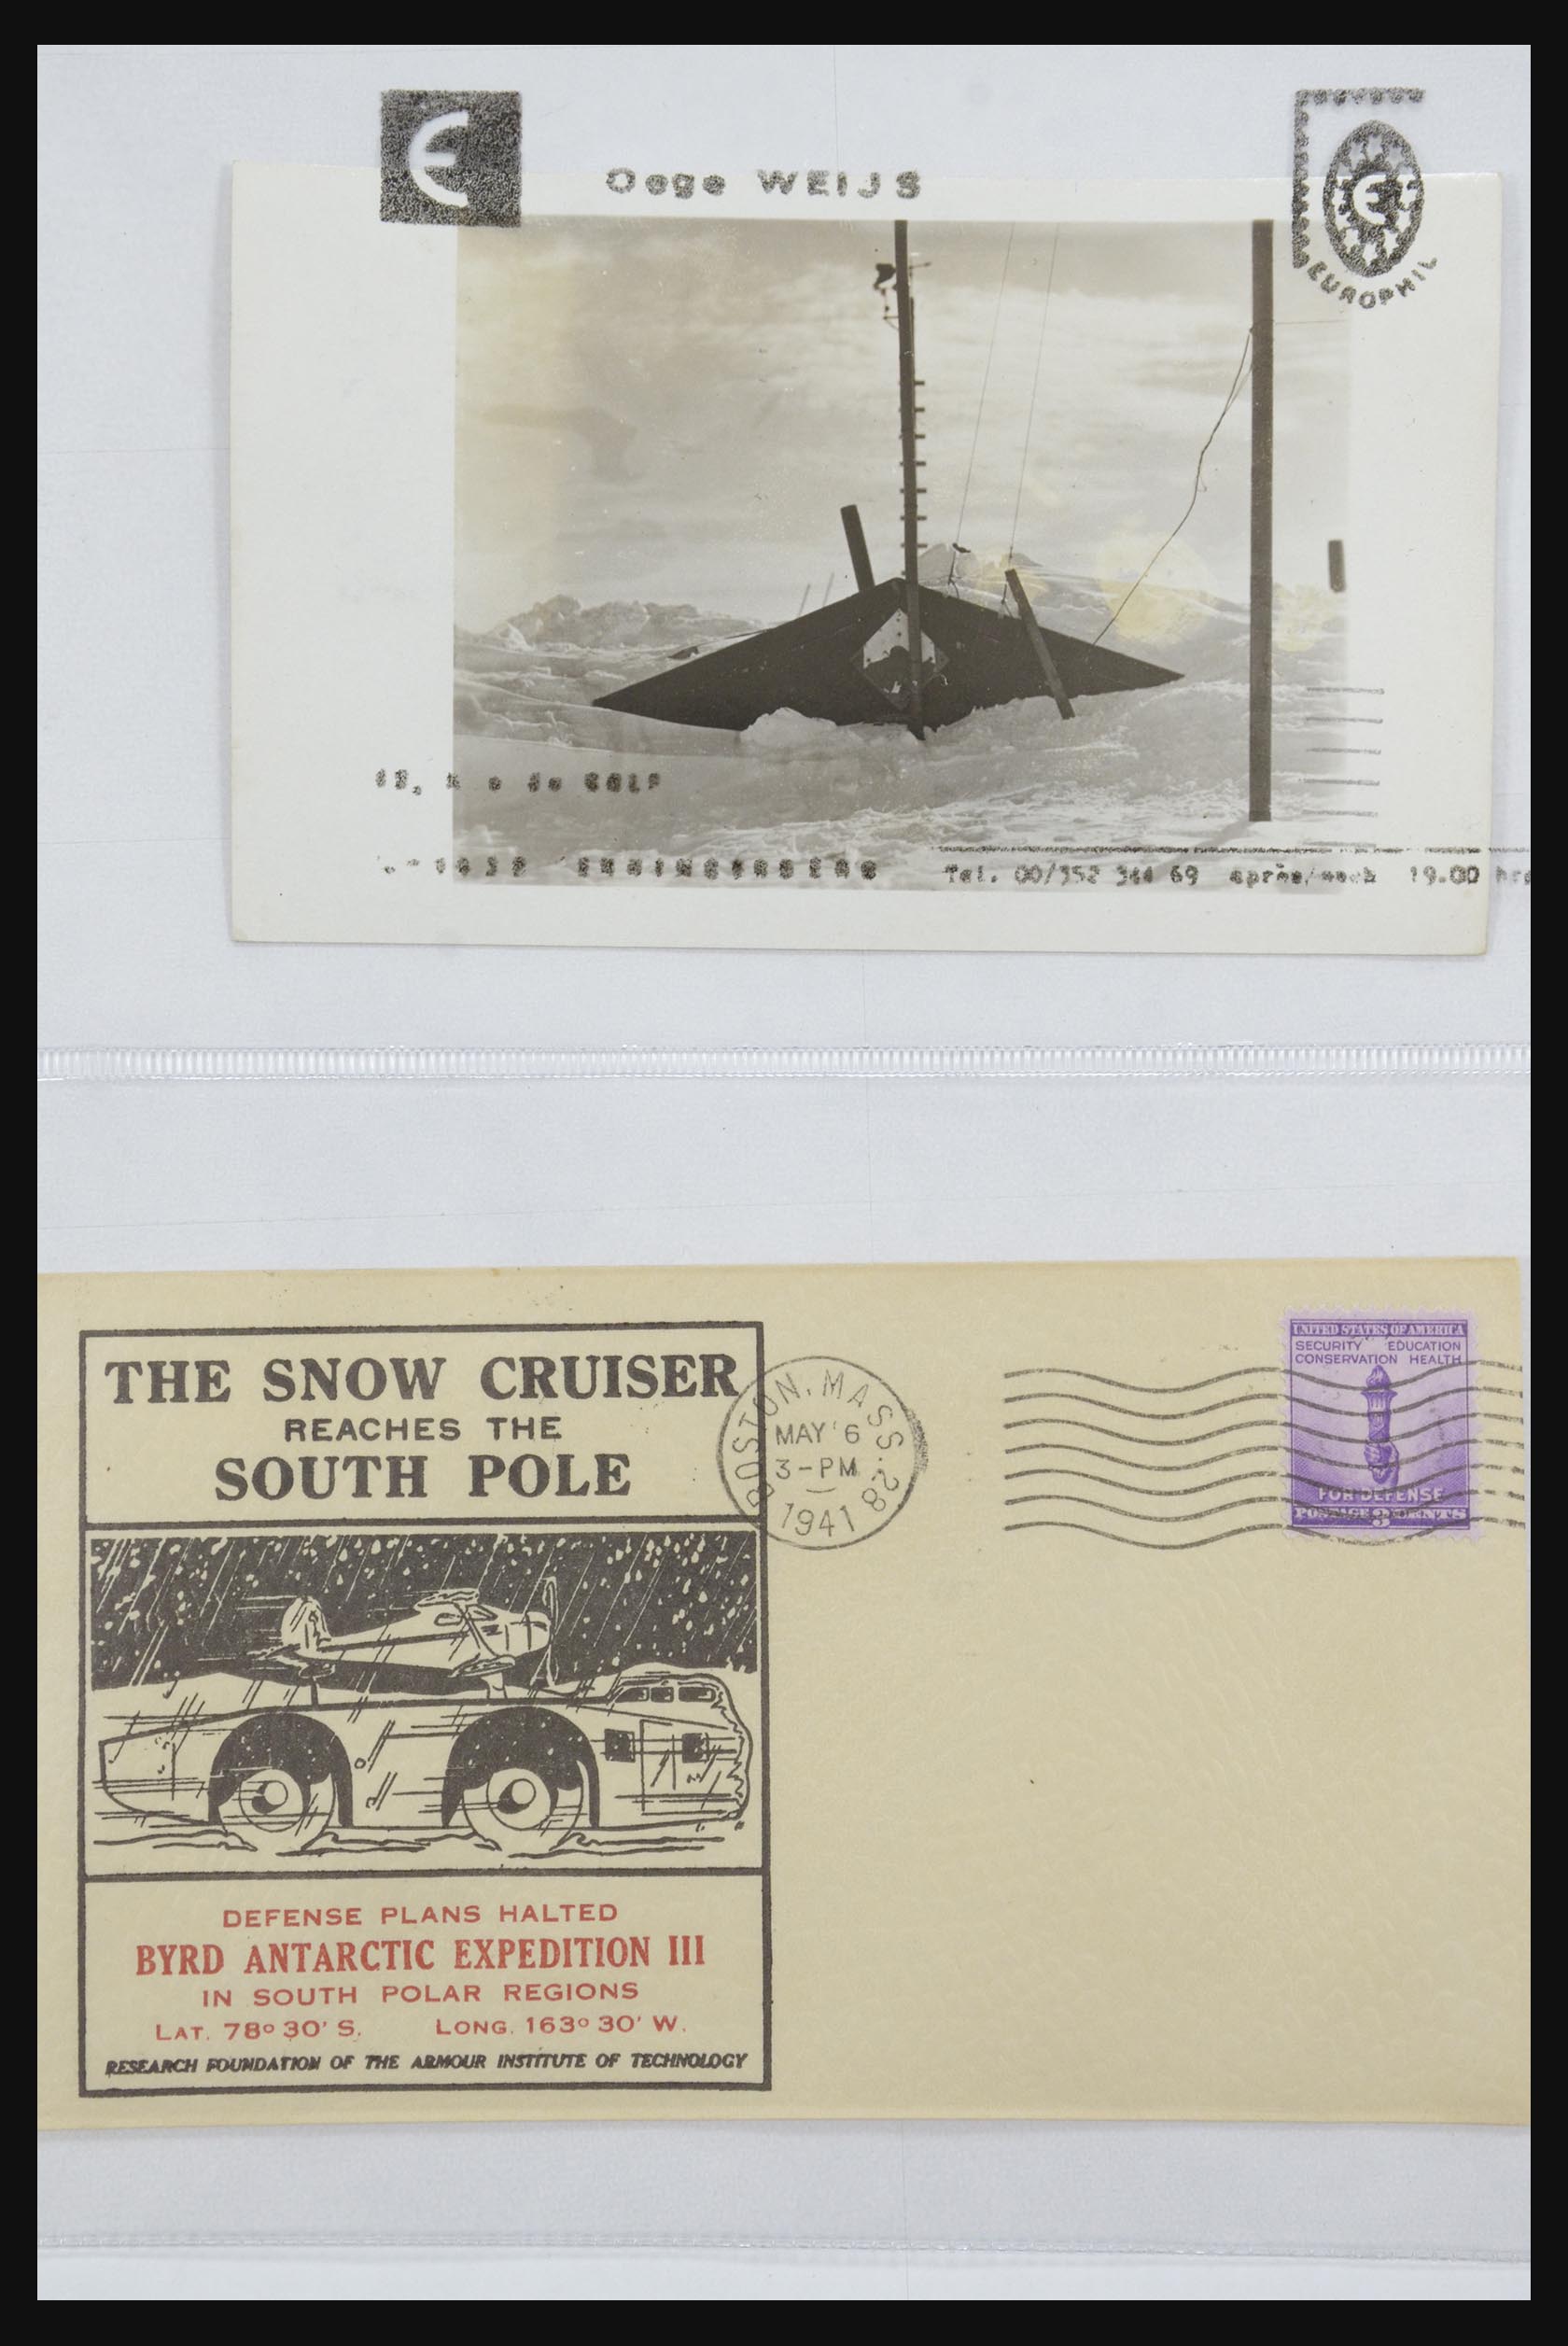 31627 031 - 31627 Byrd Antarctic Expedition 1934.